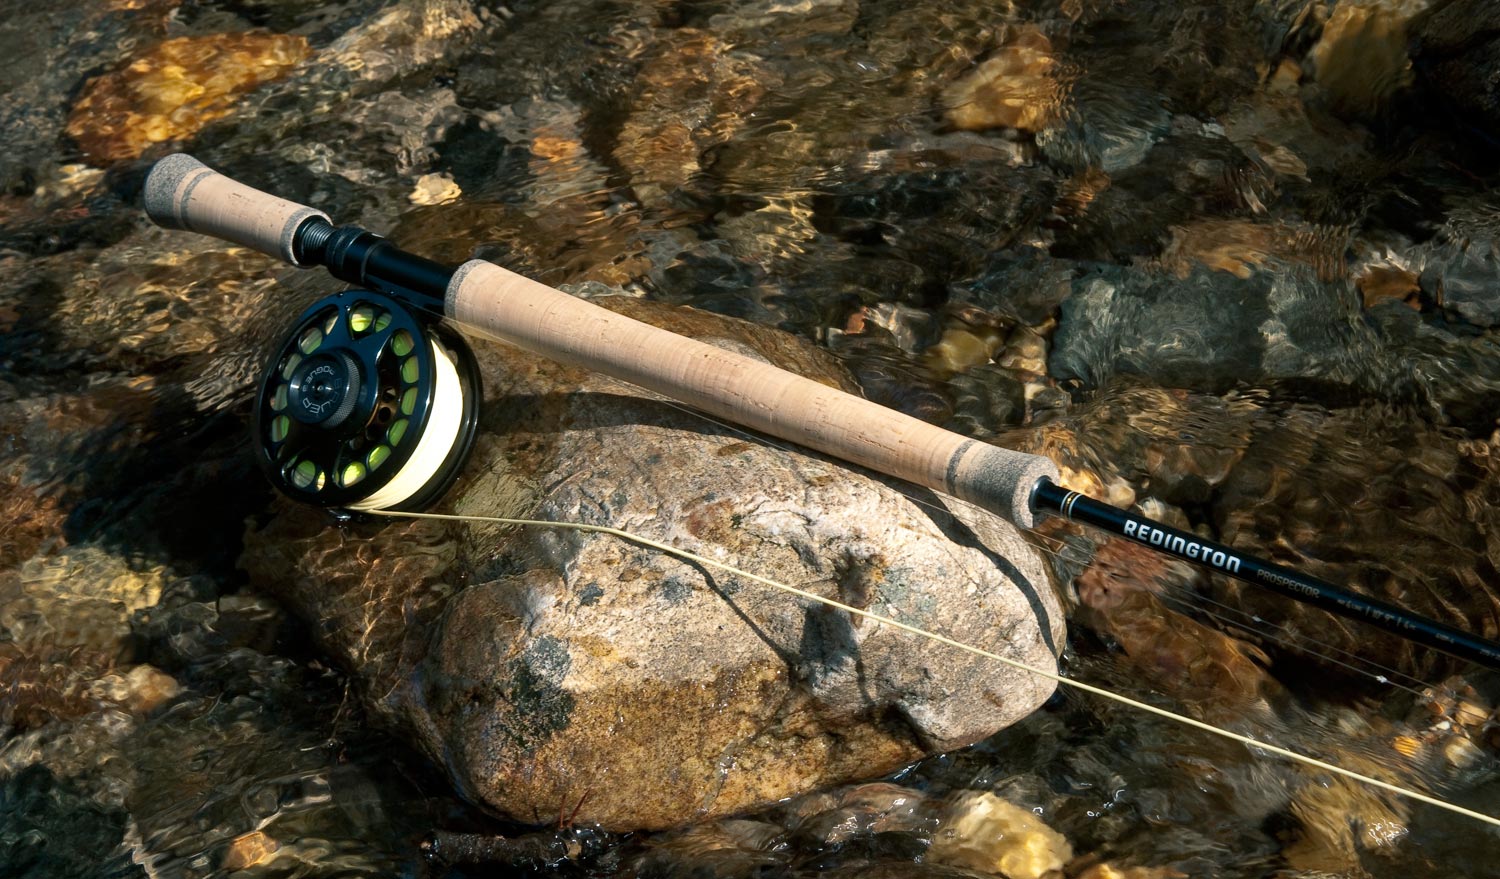 The Redington Prospector Delivers on the Promise - Fly Fishing